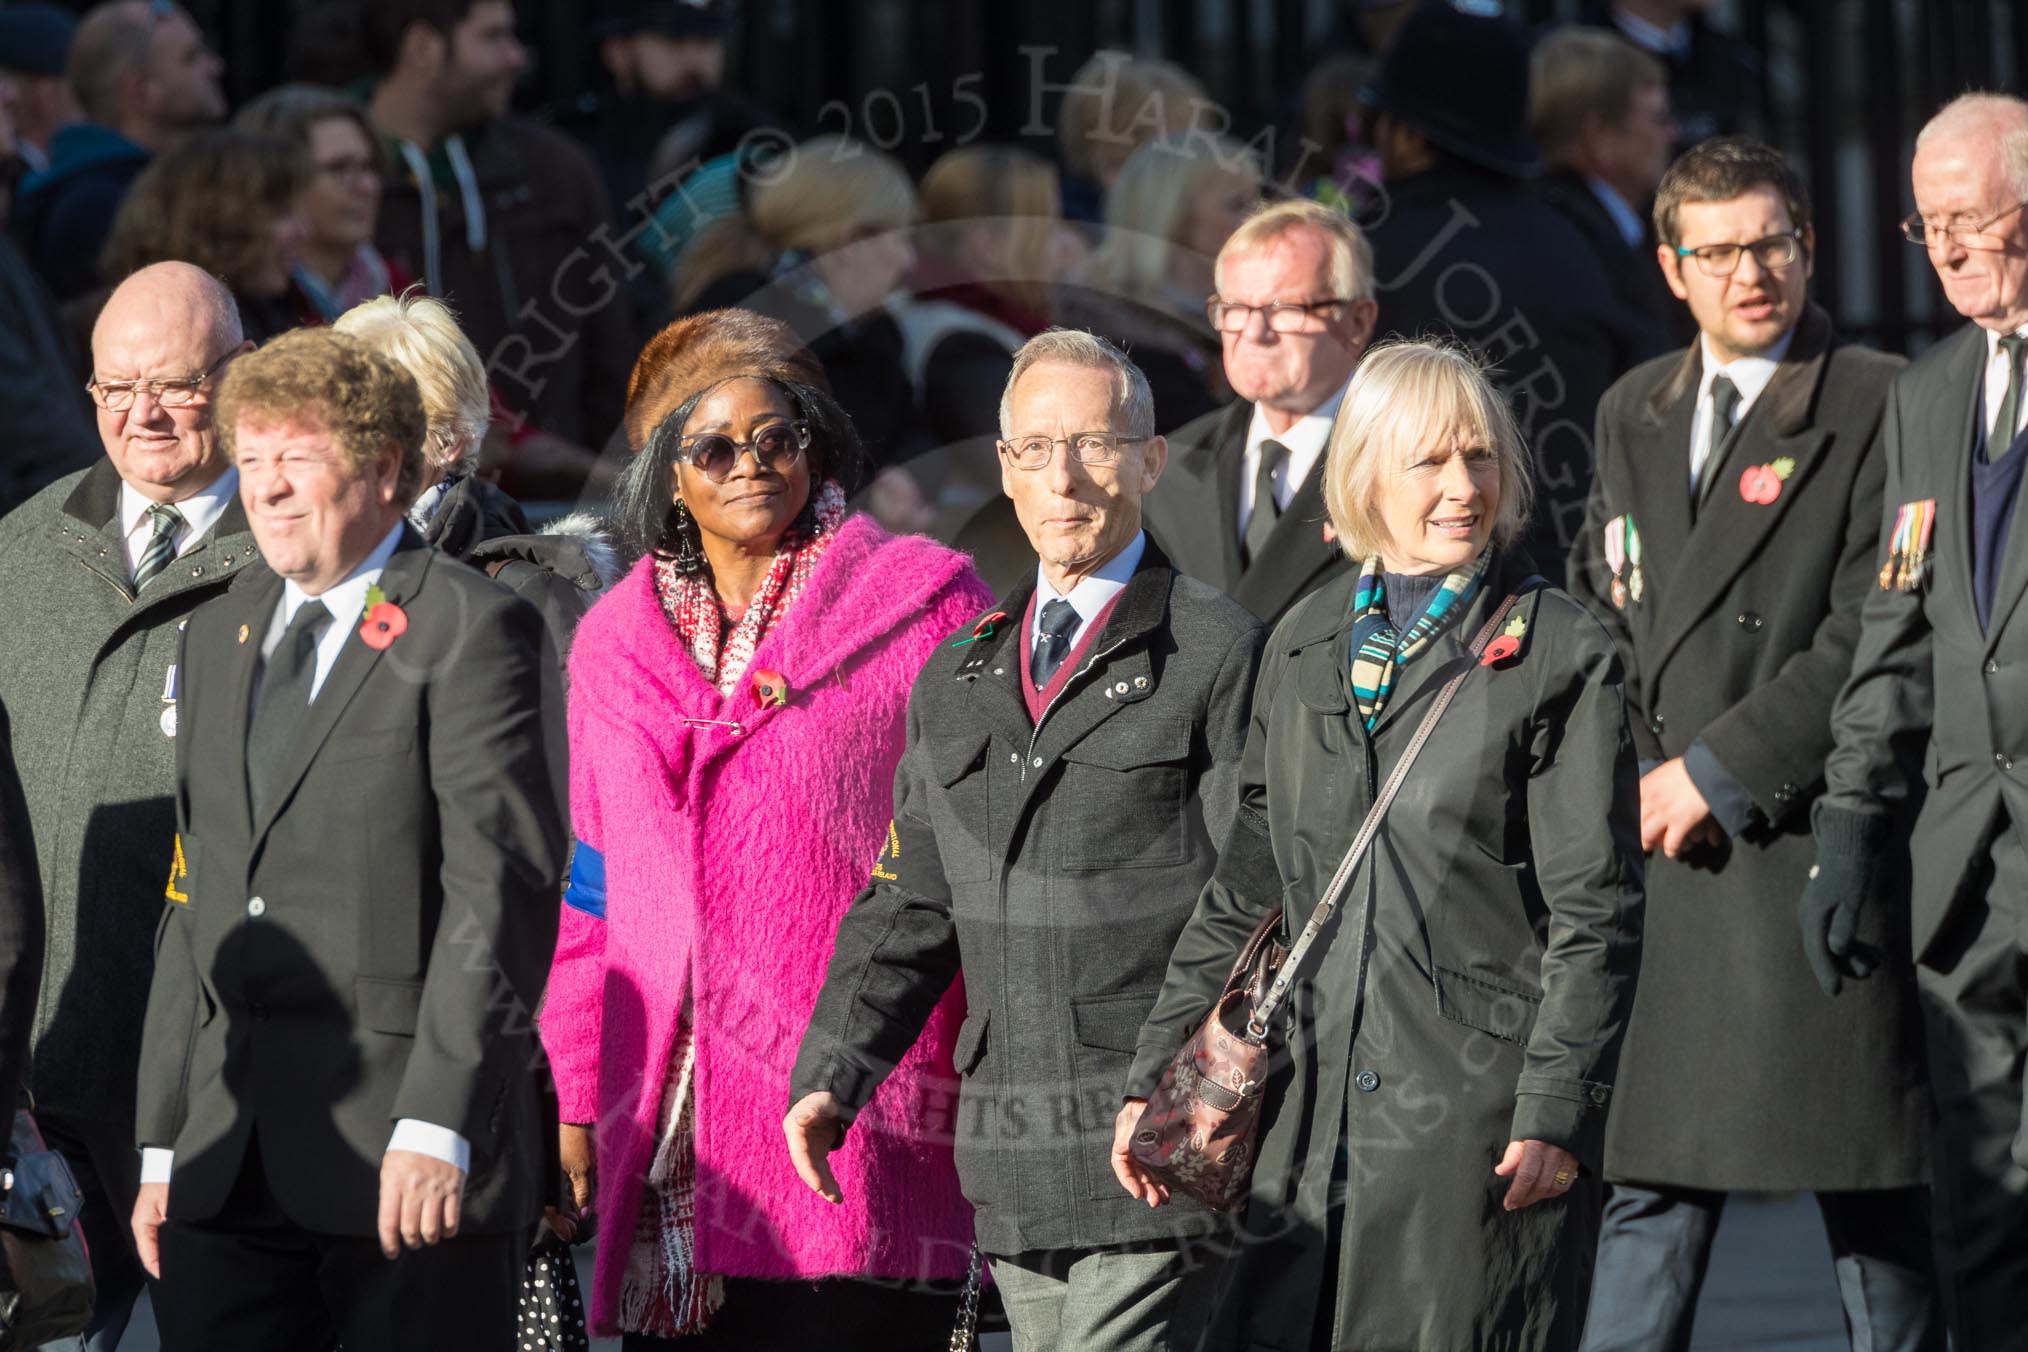 March Past, Remembrance Sunday at the Cenotaph 2016: M28 Lions Club International.
Cenotaph, Whitehall, London SW1,
London,
Greater London,
United Kingdom,
on 13 November 2016 at 13:17, image #2746